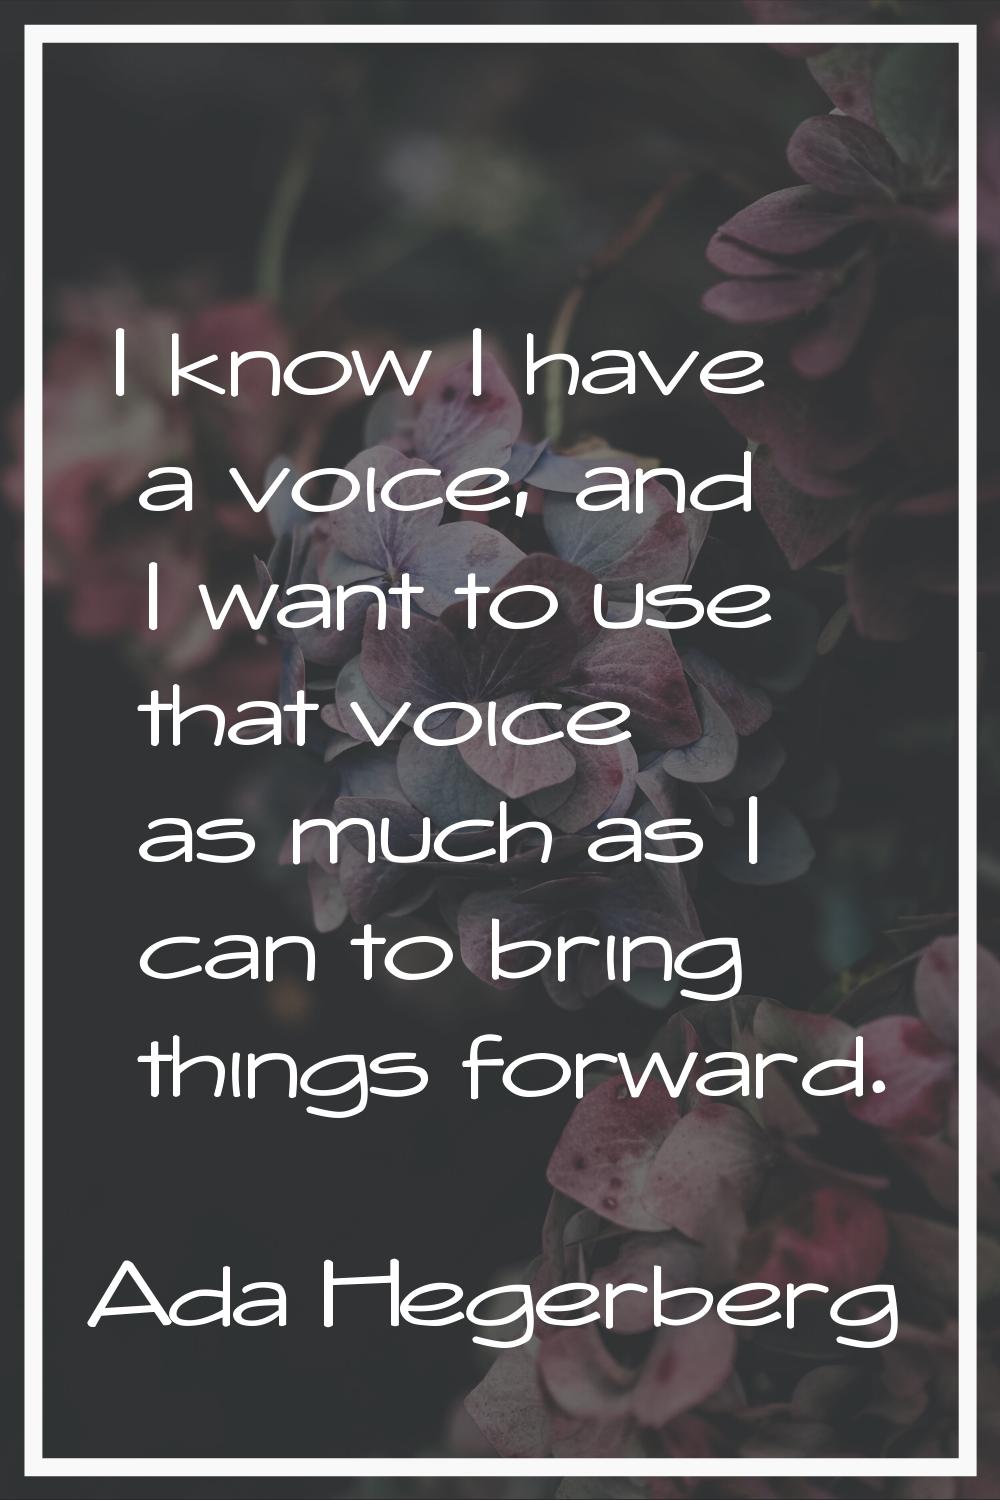 I know I have a voice, and I want to use that voice as much as I can to bring things forward.